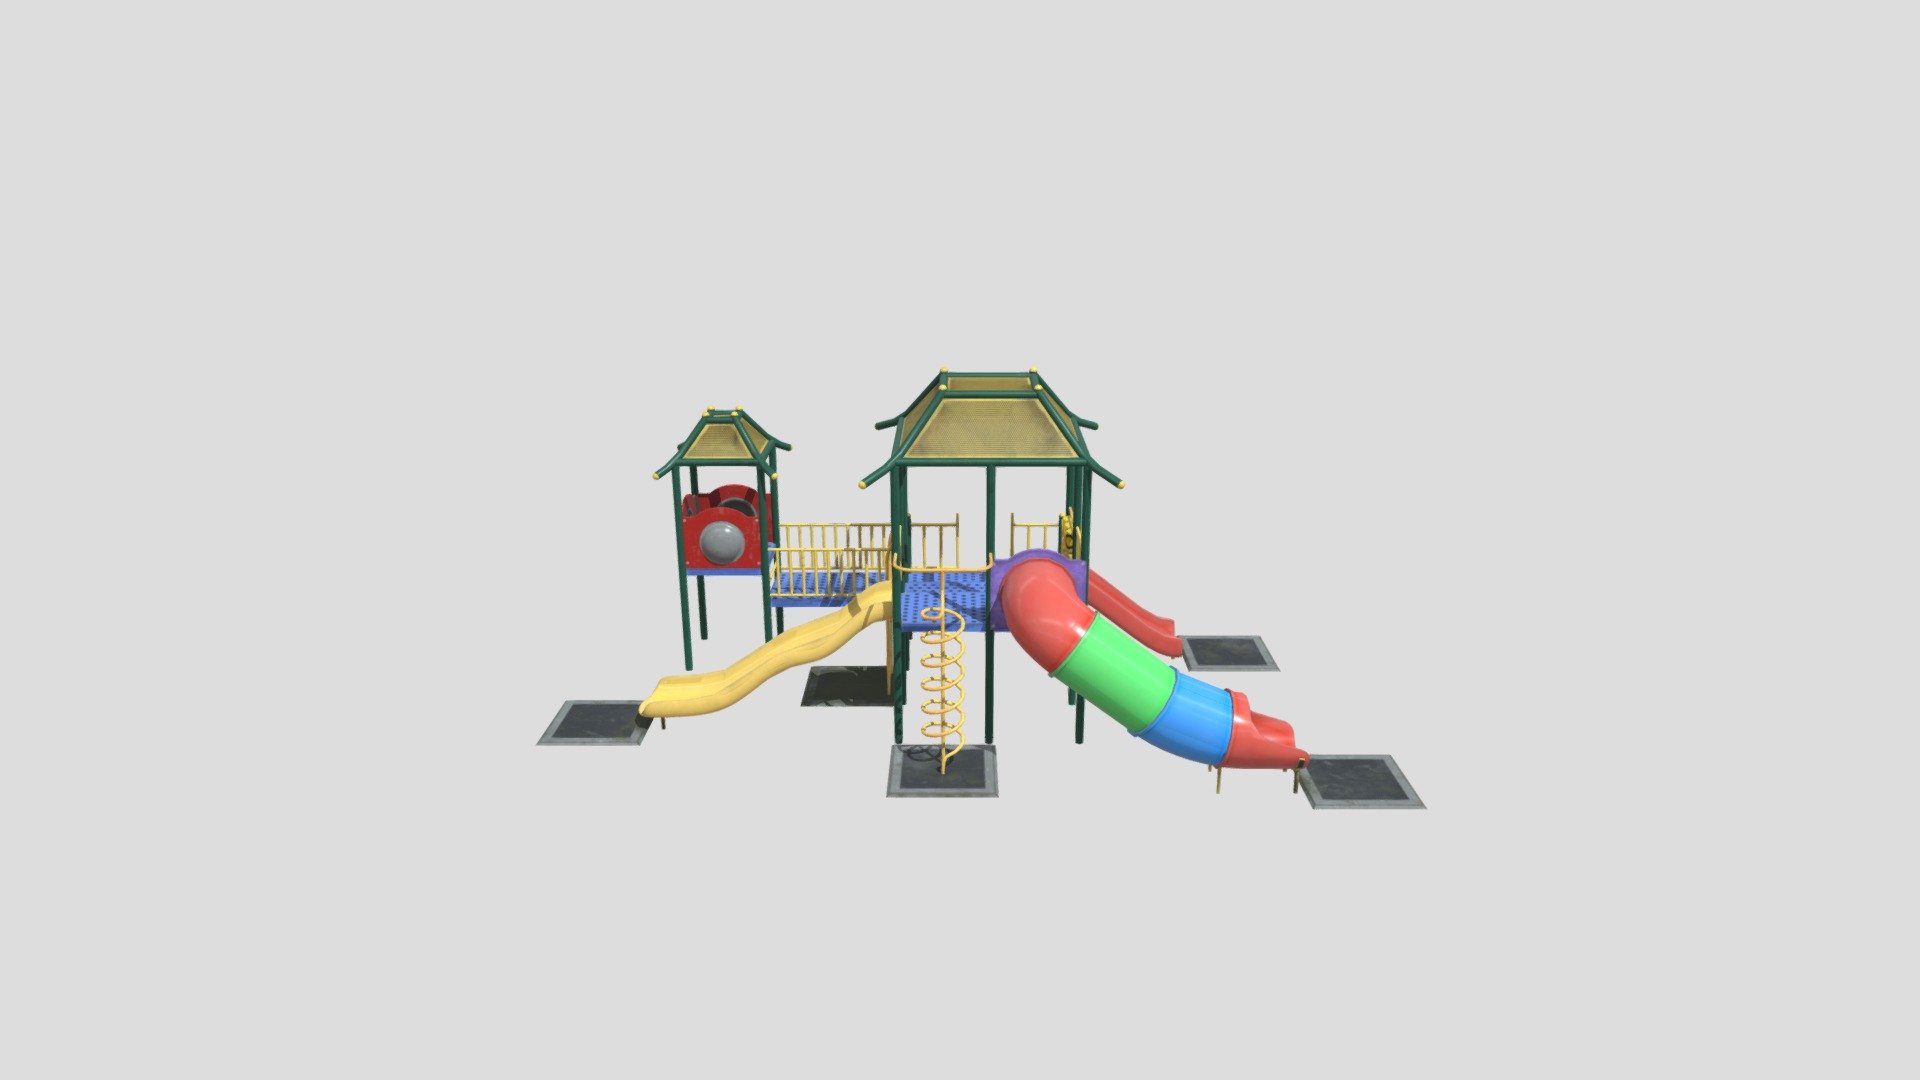 Playground House




Real-life scale

Dimensions: 8.07m x 4.66m x 3.38m

2K PBR textureset (Base color, AO, Metalness, Normal, Opacity, Roughness and Thickness)

Containing five (5) seperated materials

25874 polygons are the sum of all the LODs

Game ready model with 3 LODs:

LOD 0: 17173 faces, 18740 vertices

LOD 1: 5362 faces, 6316 vertices

LOD 2: 3339 faces, 4306 vertices
 - Playground House - 3D model by digitalvisionartist 3d model